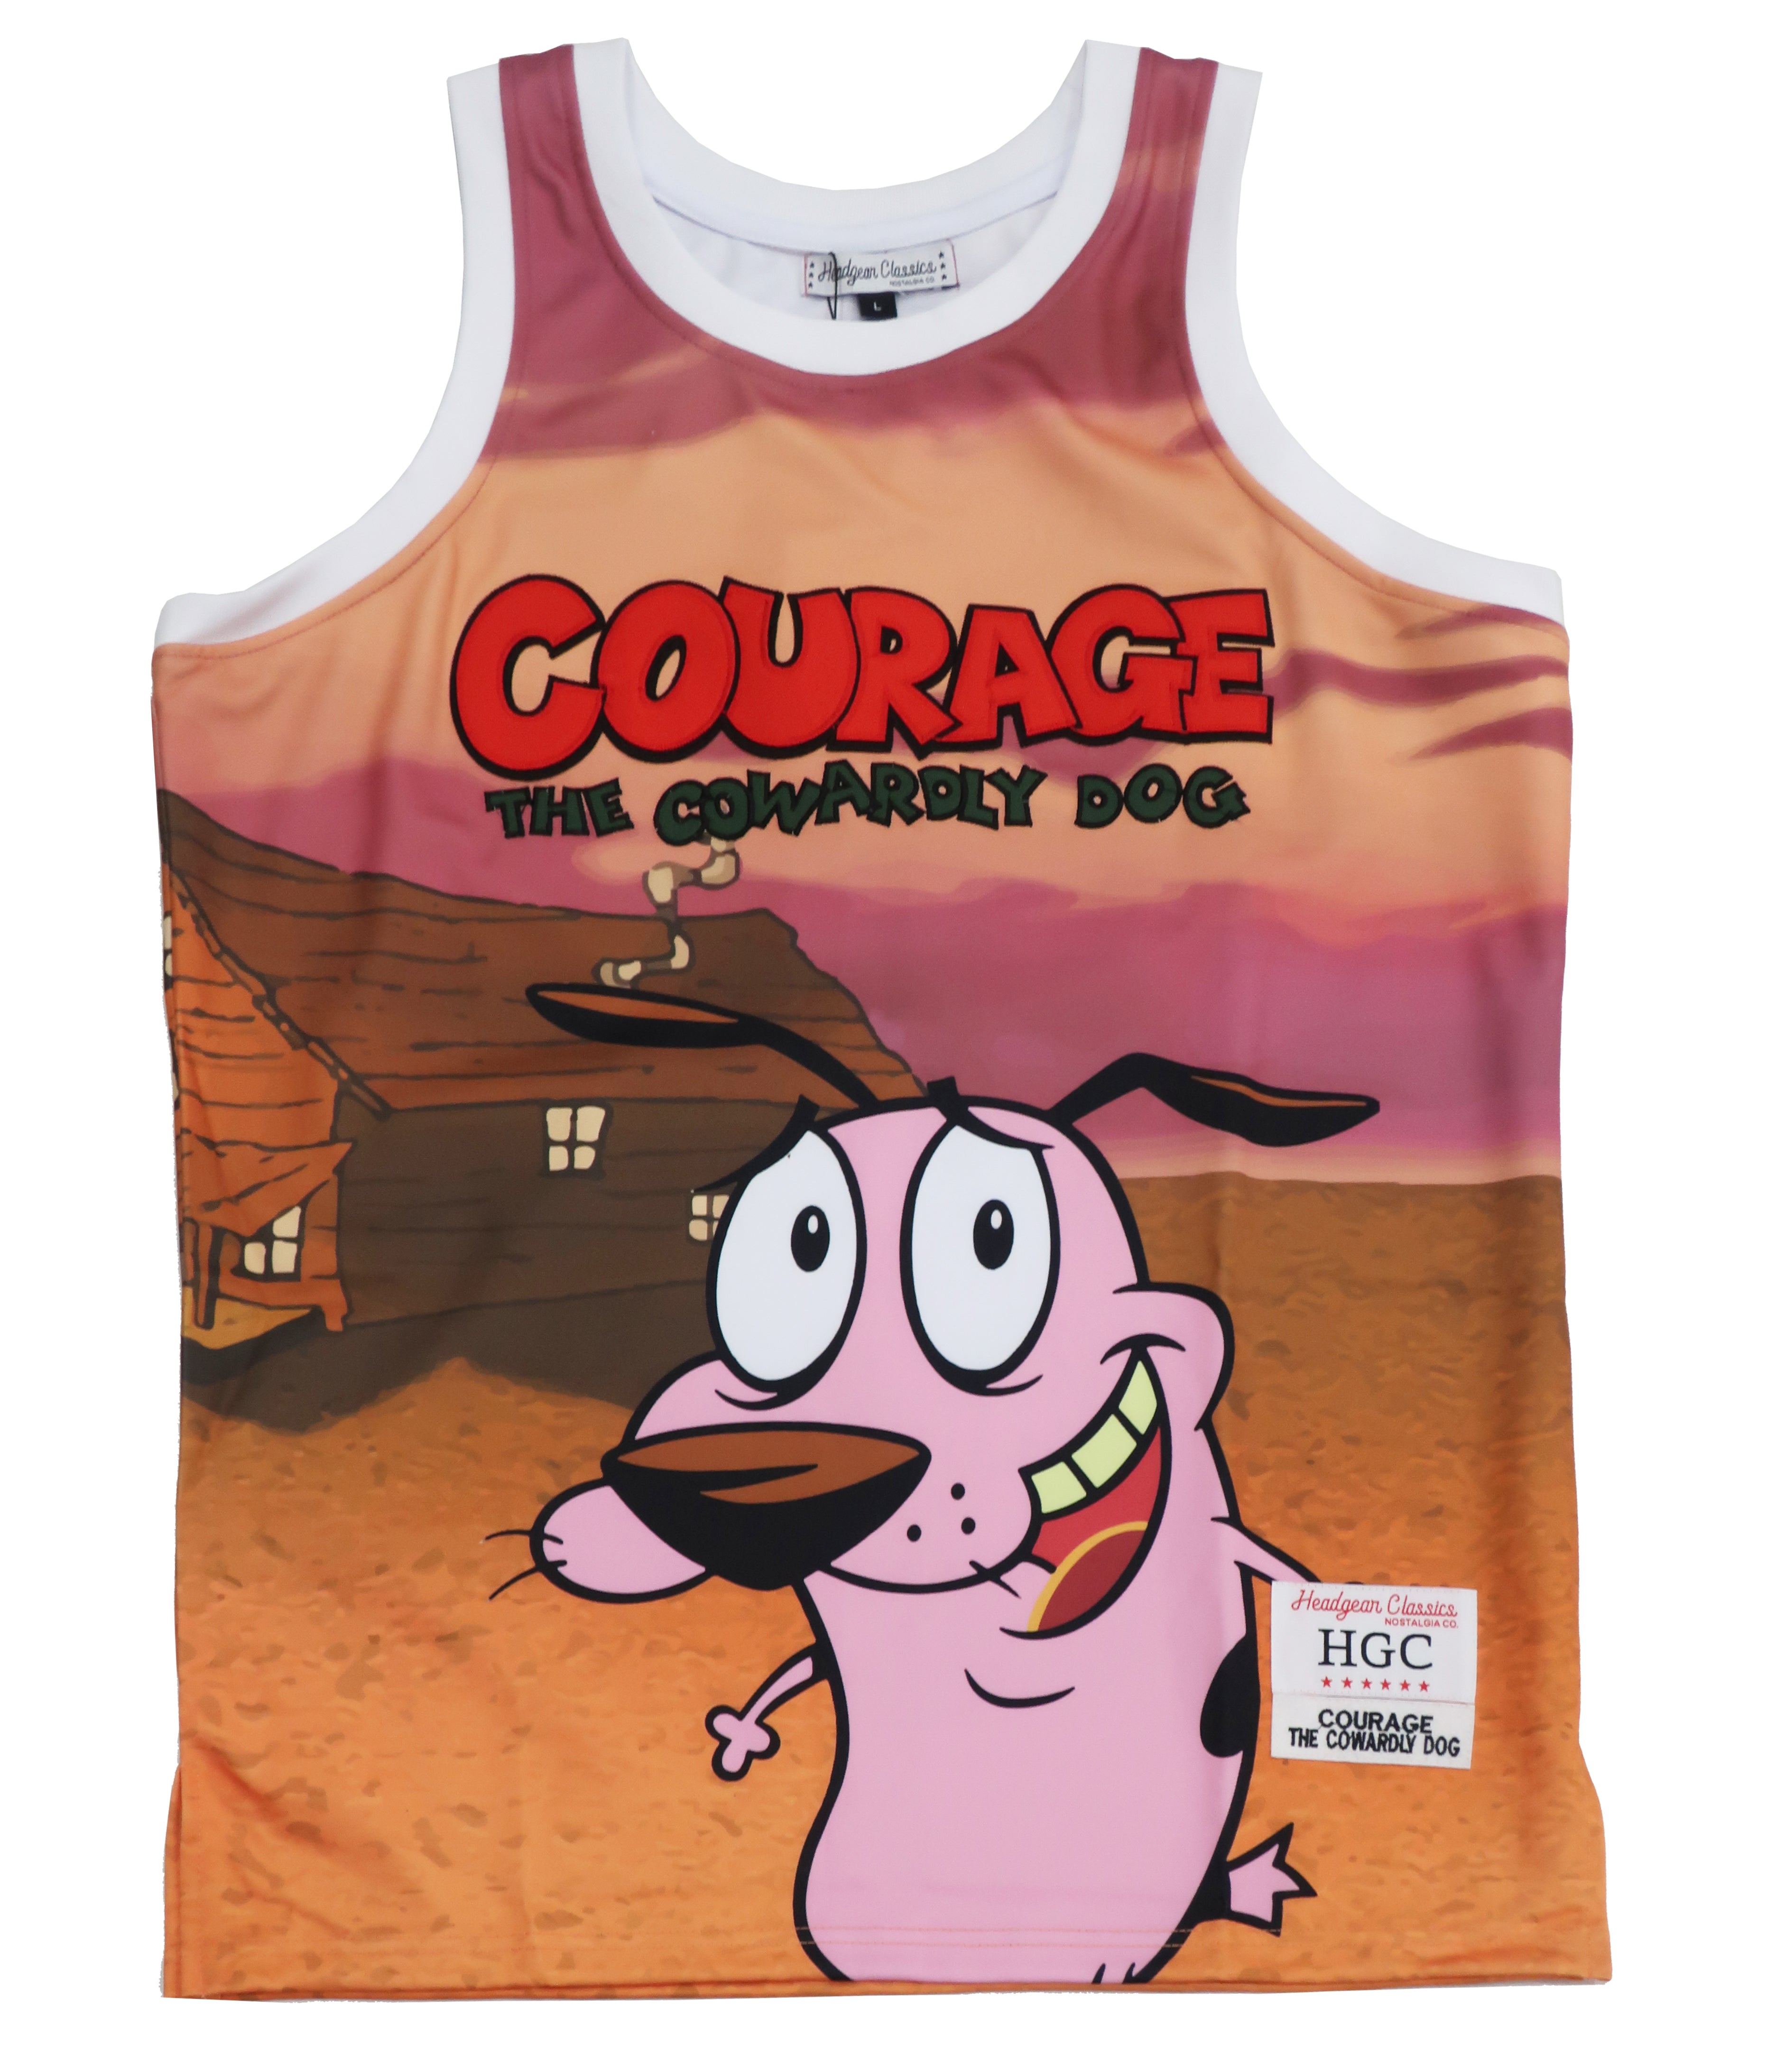 Wholesale Courage the Cowardly Dog Basketball Jersey